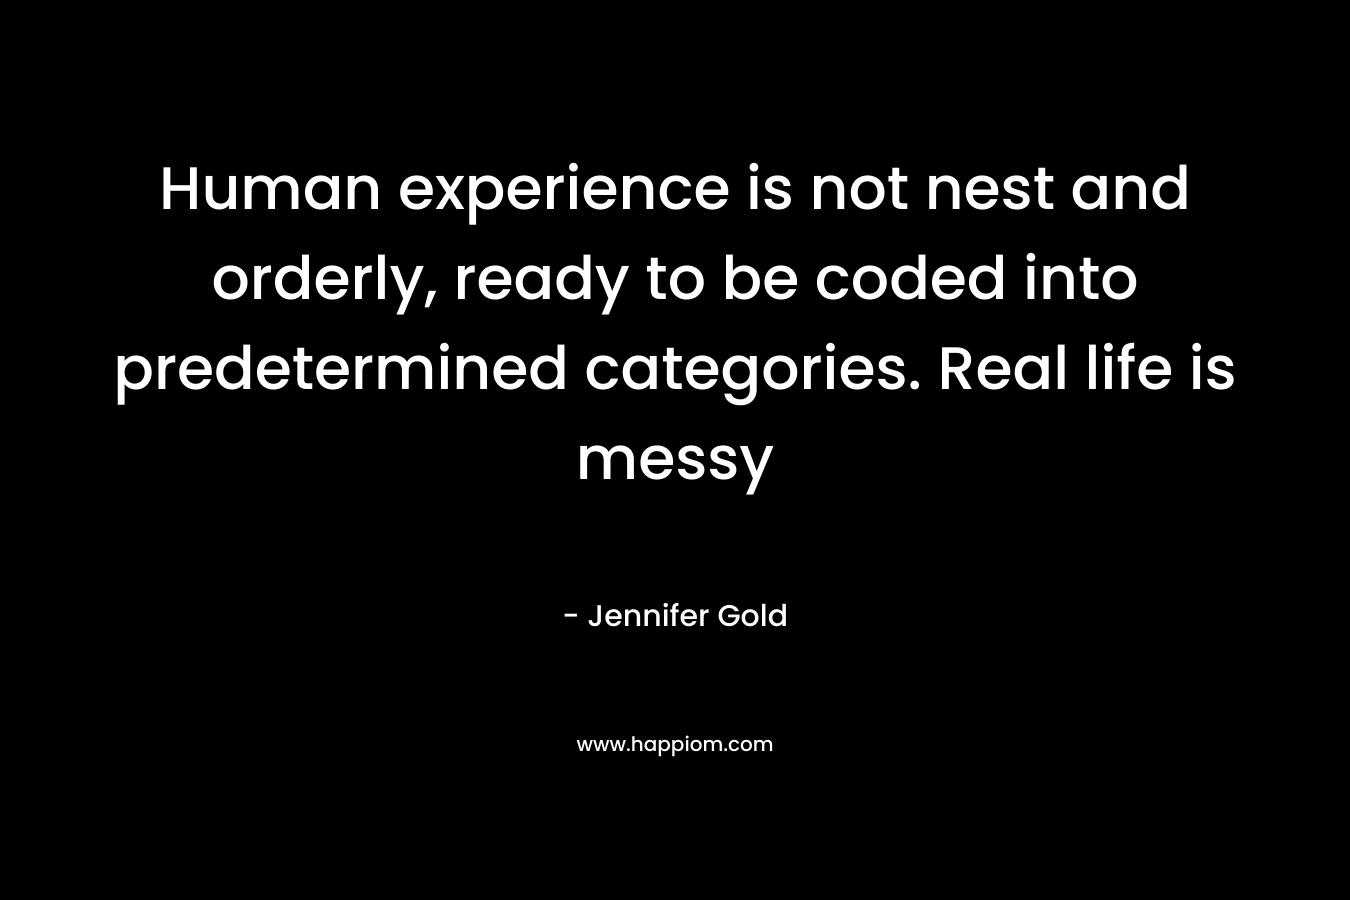 Human experience is not nest and orderly, ready to be coded into predetermined categories. Real life is messy